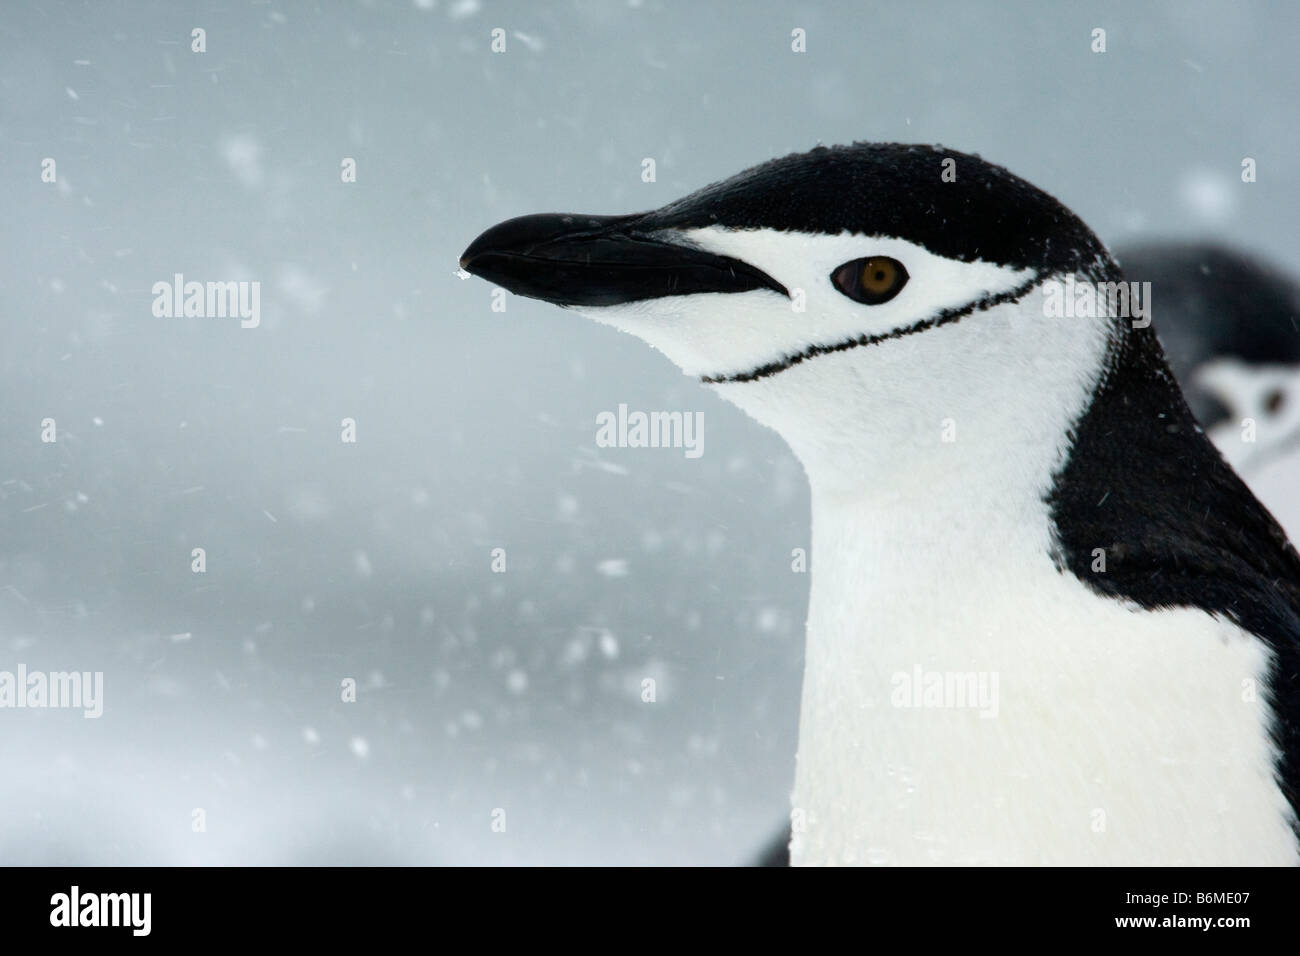 Close-up horizontal portrait of a Chinstrap Penguin in a snowstorm in South Orkney Islands of Antarctica. Stock Photo